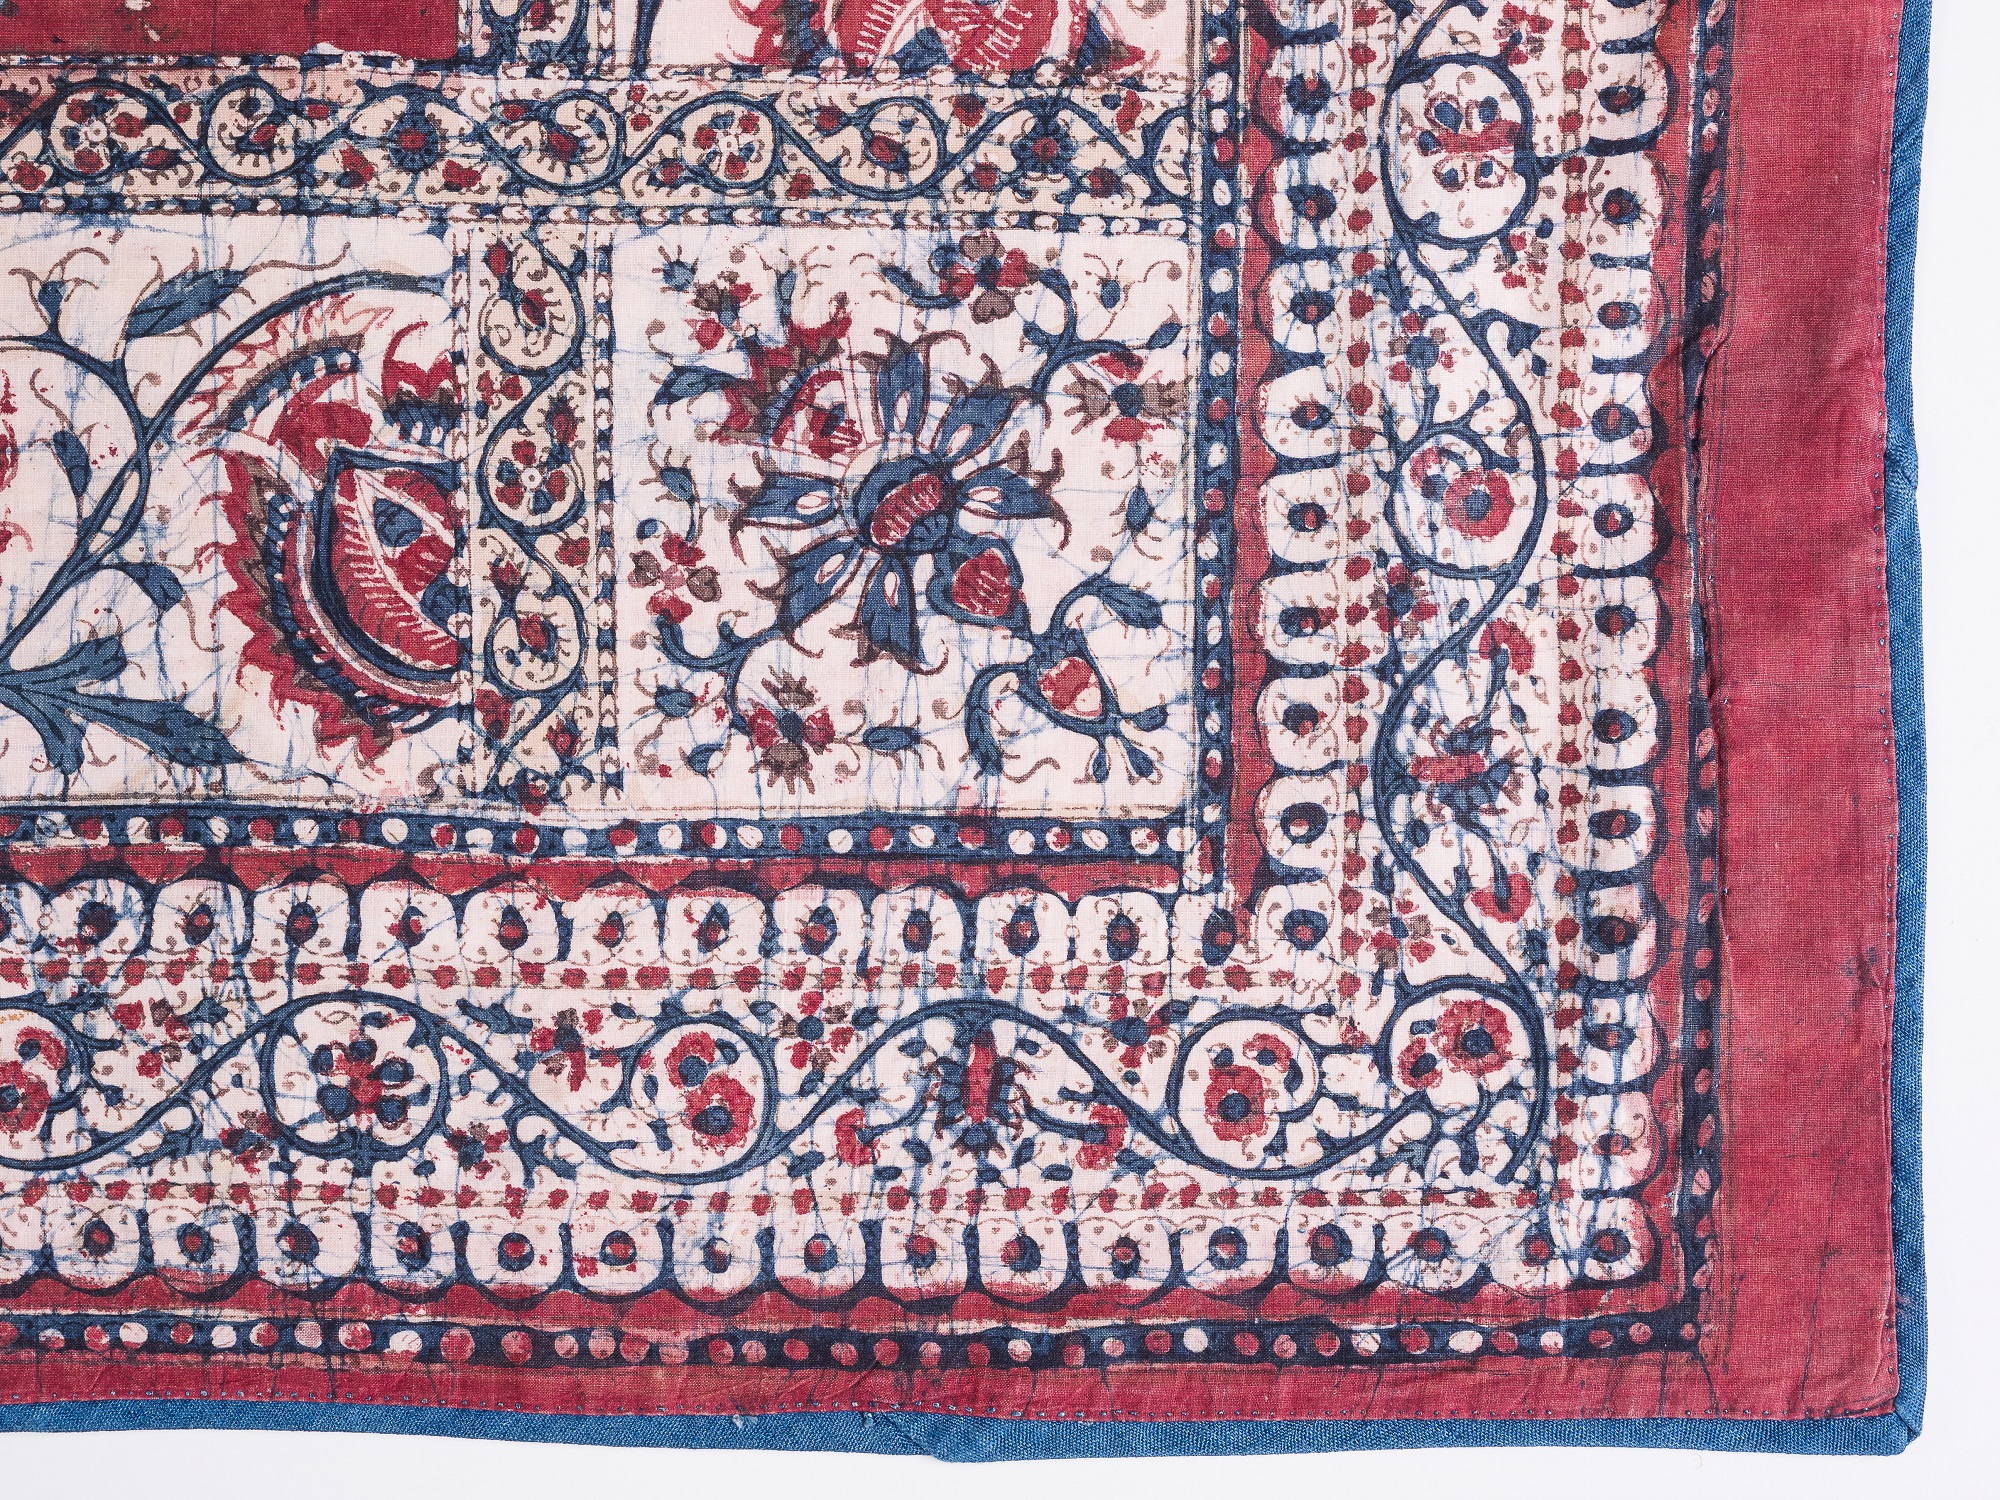 A number of print methods are evident on this furnishing fabric, likely created in India for the European market. The central square is roller printed while the surrounding band is batik: worked with a resist of resin and glue, then immersed in a vat of indigo dye. The smooth finish suggests that the fabric was glazed once printed and dying was complete.   Bought in Baghdad in 1960, created c.1880